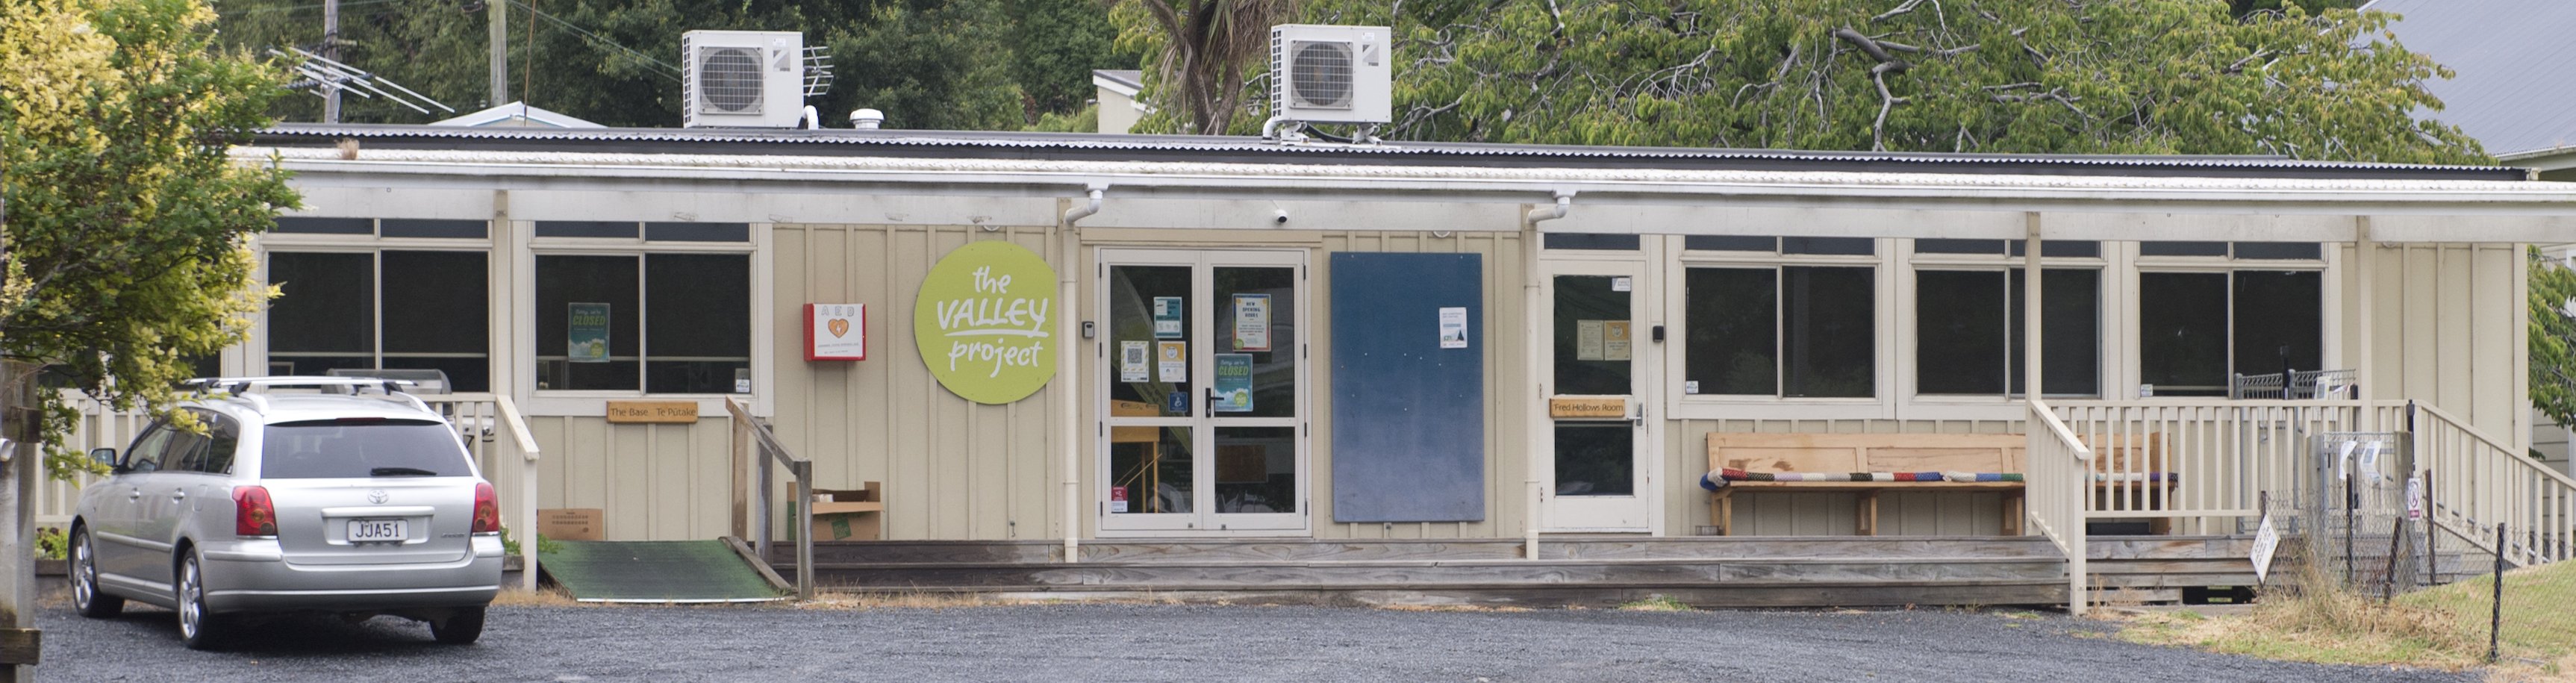 The Valley Project rooms in North Rd, North East Valley. PHOTO: GERARD O’BRIEN